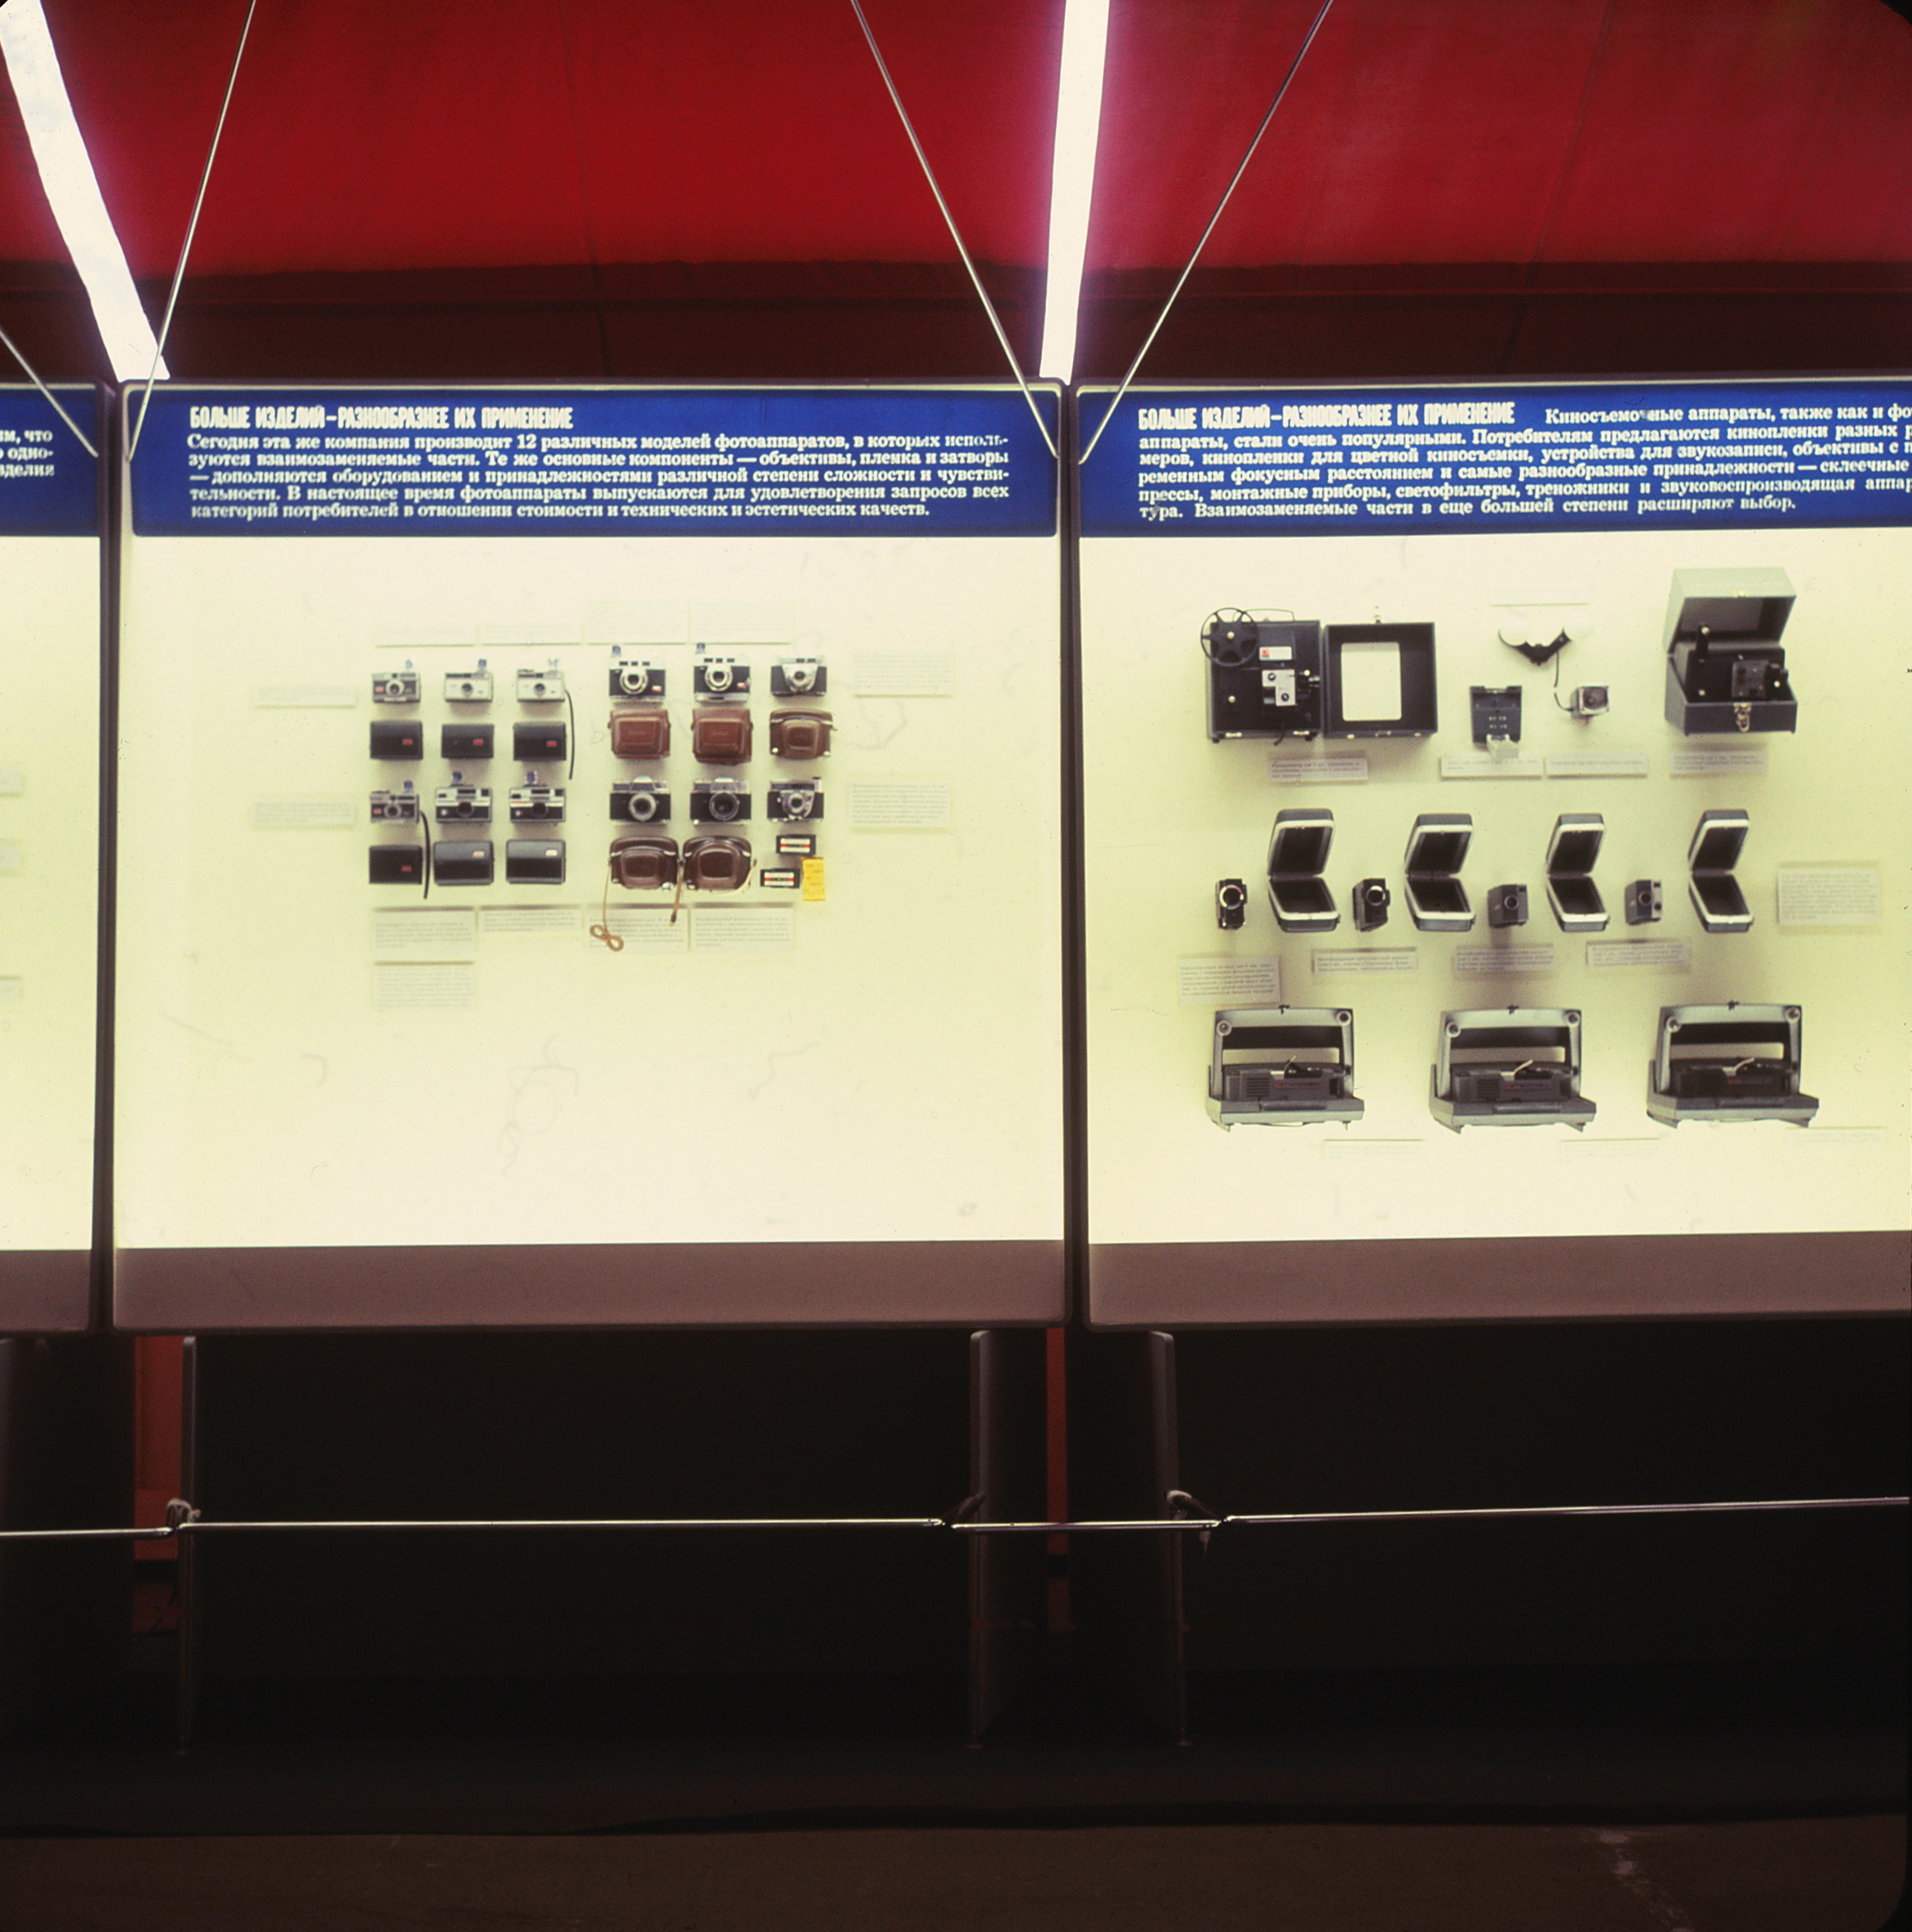 Display cases, center, with cameras featured.